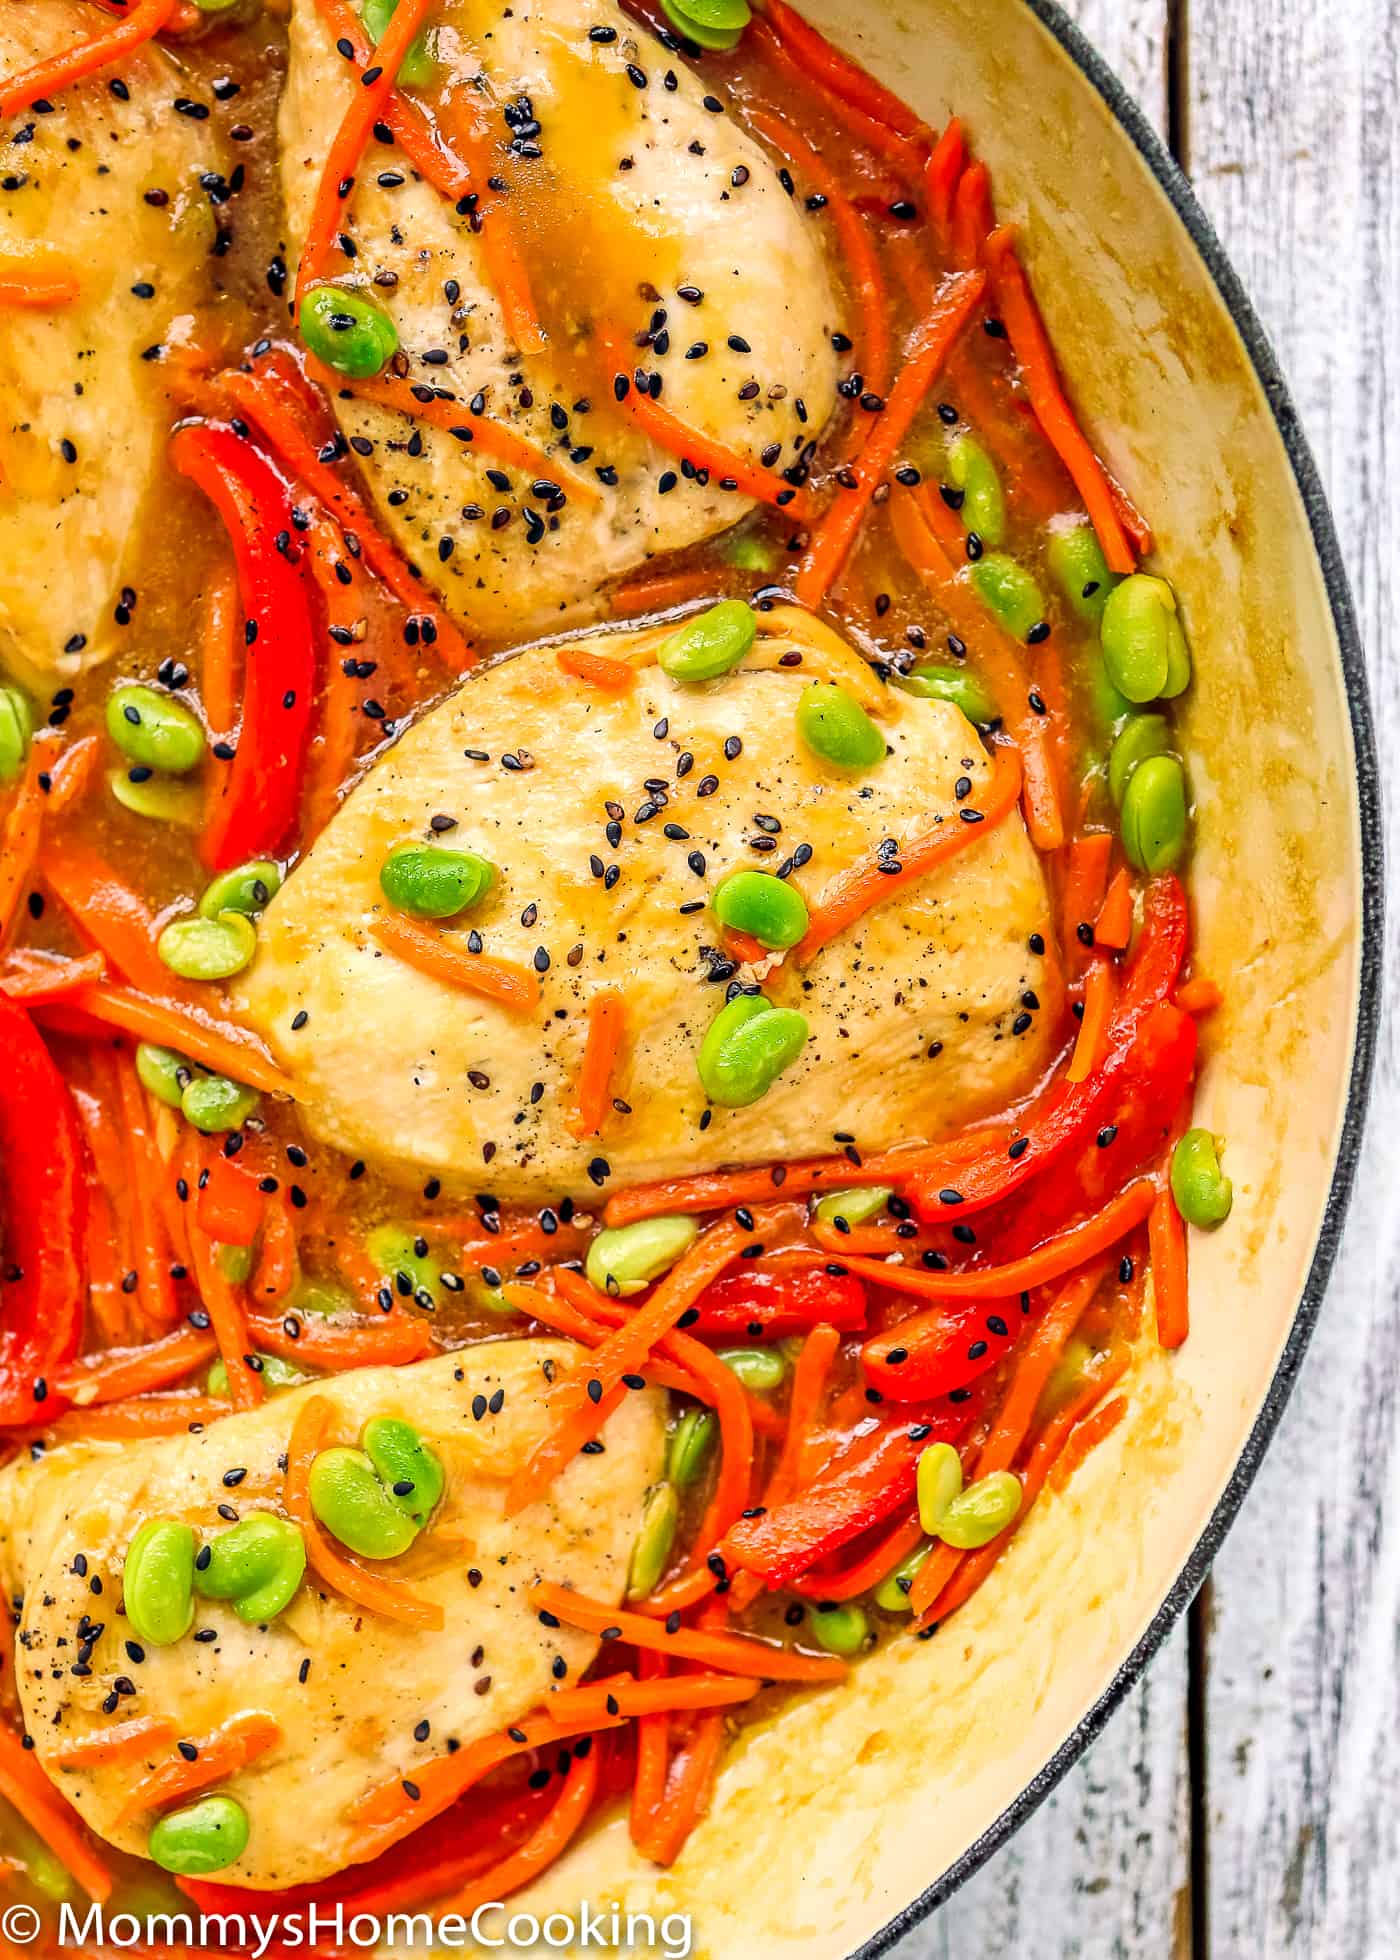 These 30-minute Orange Ginger Chicken Breasts are smothered with a deliciously bright and citrusy orange-ginger sauce. They’re a crowd pleasing hit and a fantastic weeknight meal. https://mommyshomecooking.com